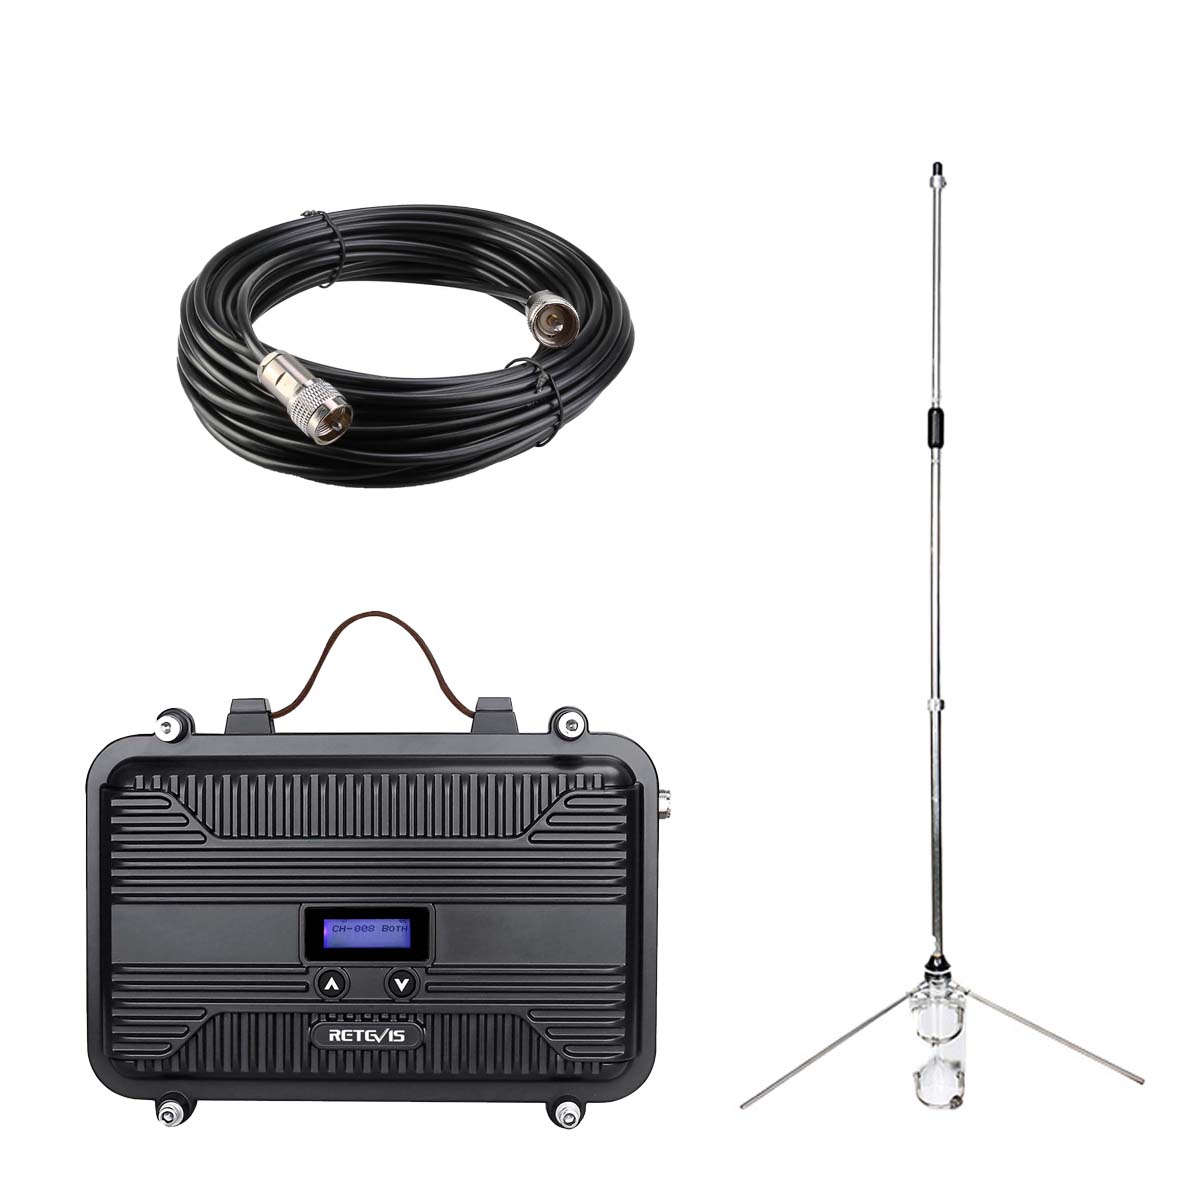 Retevis RT97S Repeater Bundle with Antenna and Coax Cable –